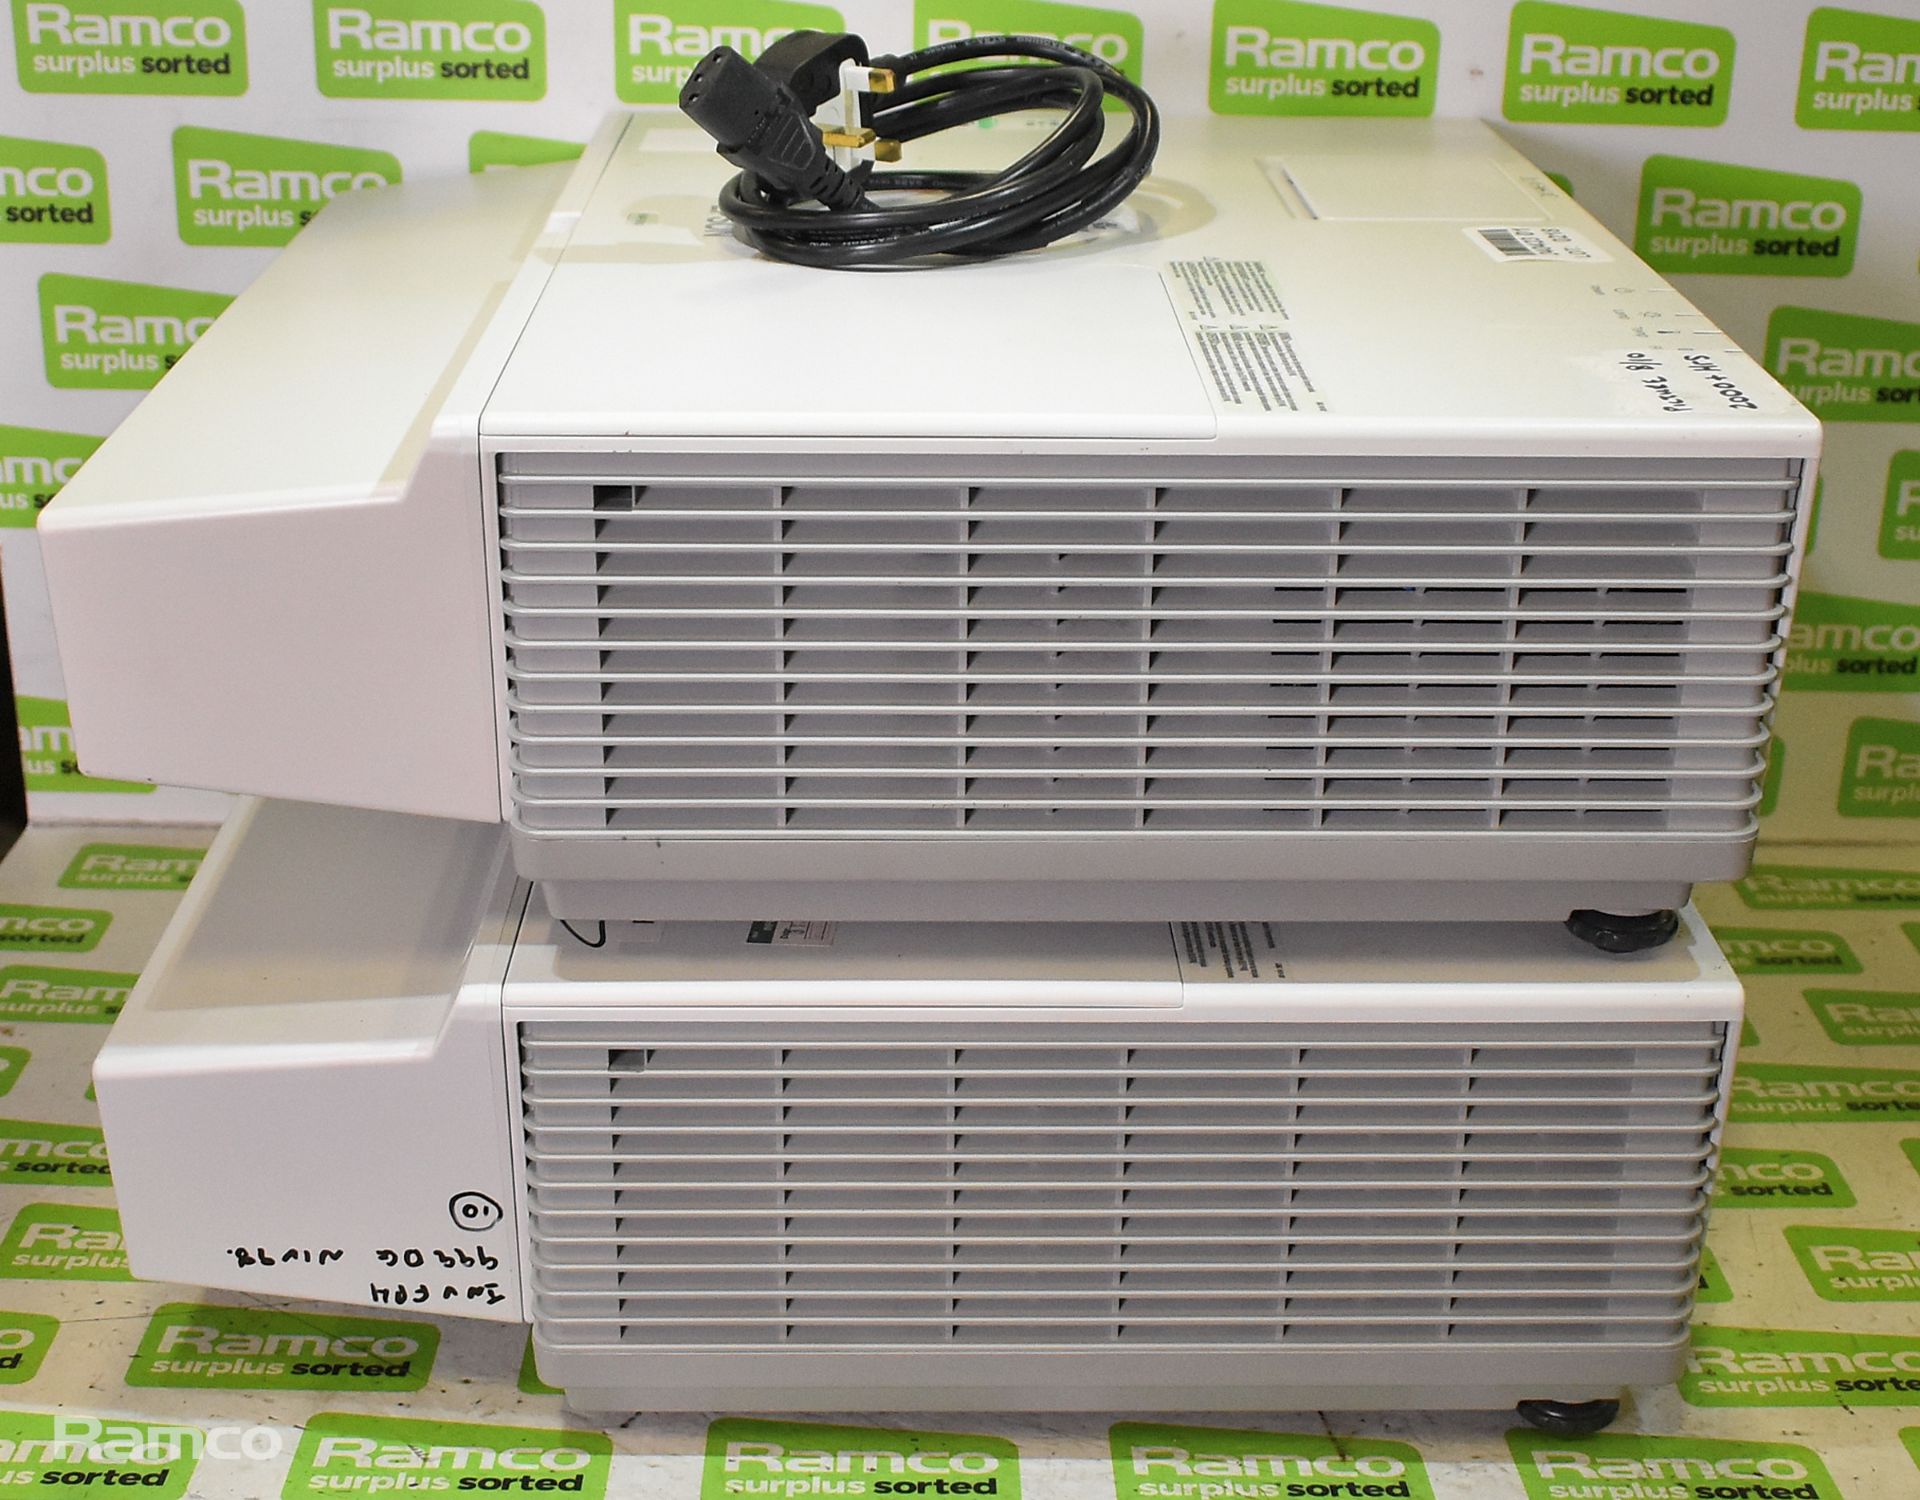 2x Epson EMP-6110 LCD projectors - Image 2 of 4